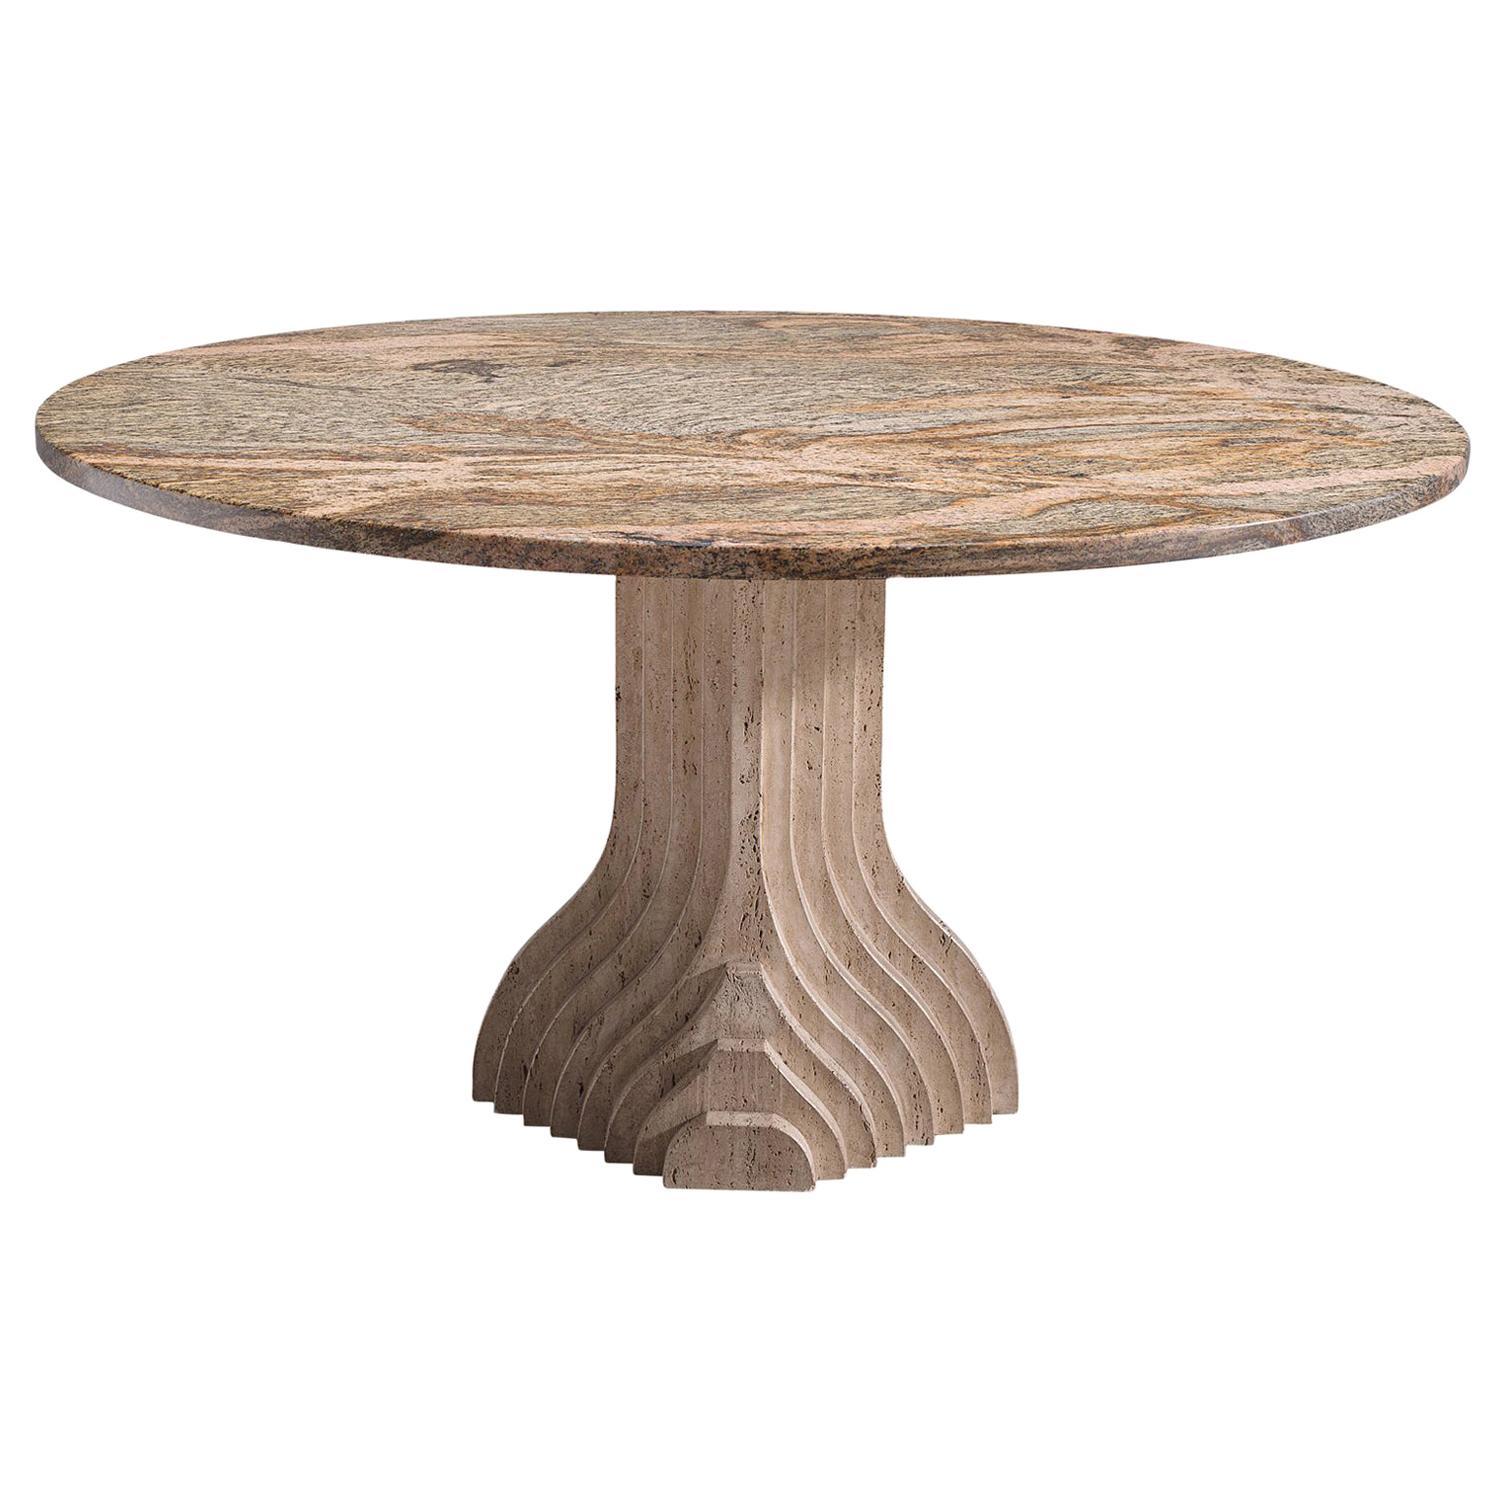 Architectural Dining Table in Travertine